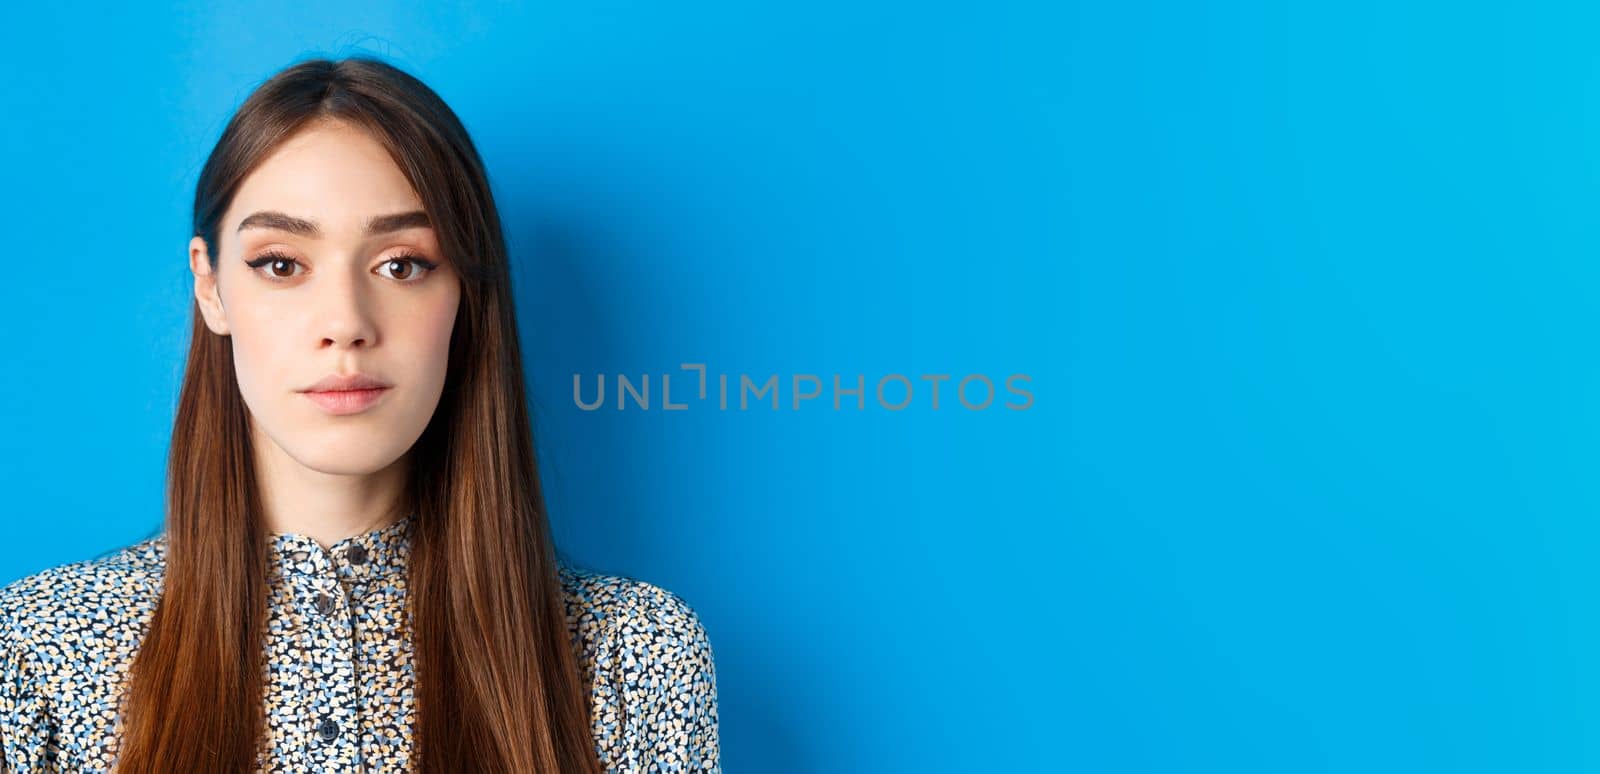 Close-up of candid beautiful woman with long natural hair and makeup, looking at camera, standing on blue background.